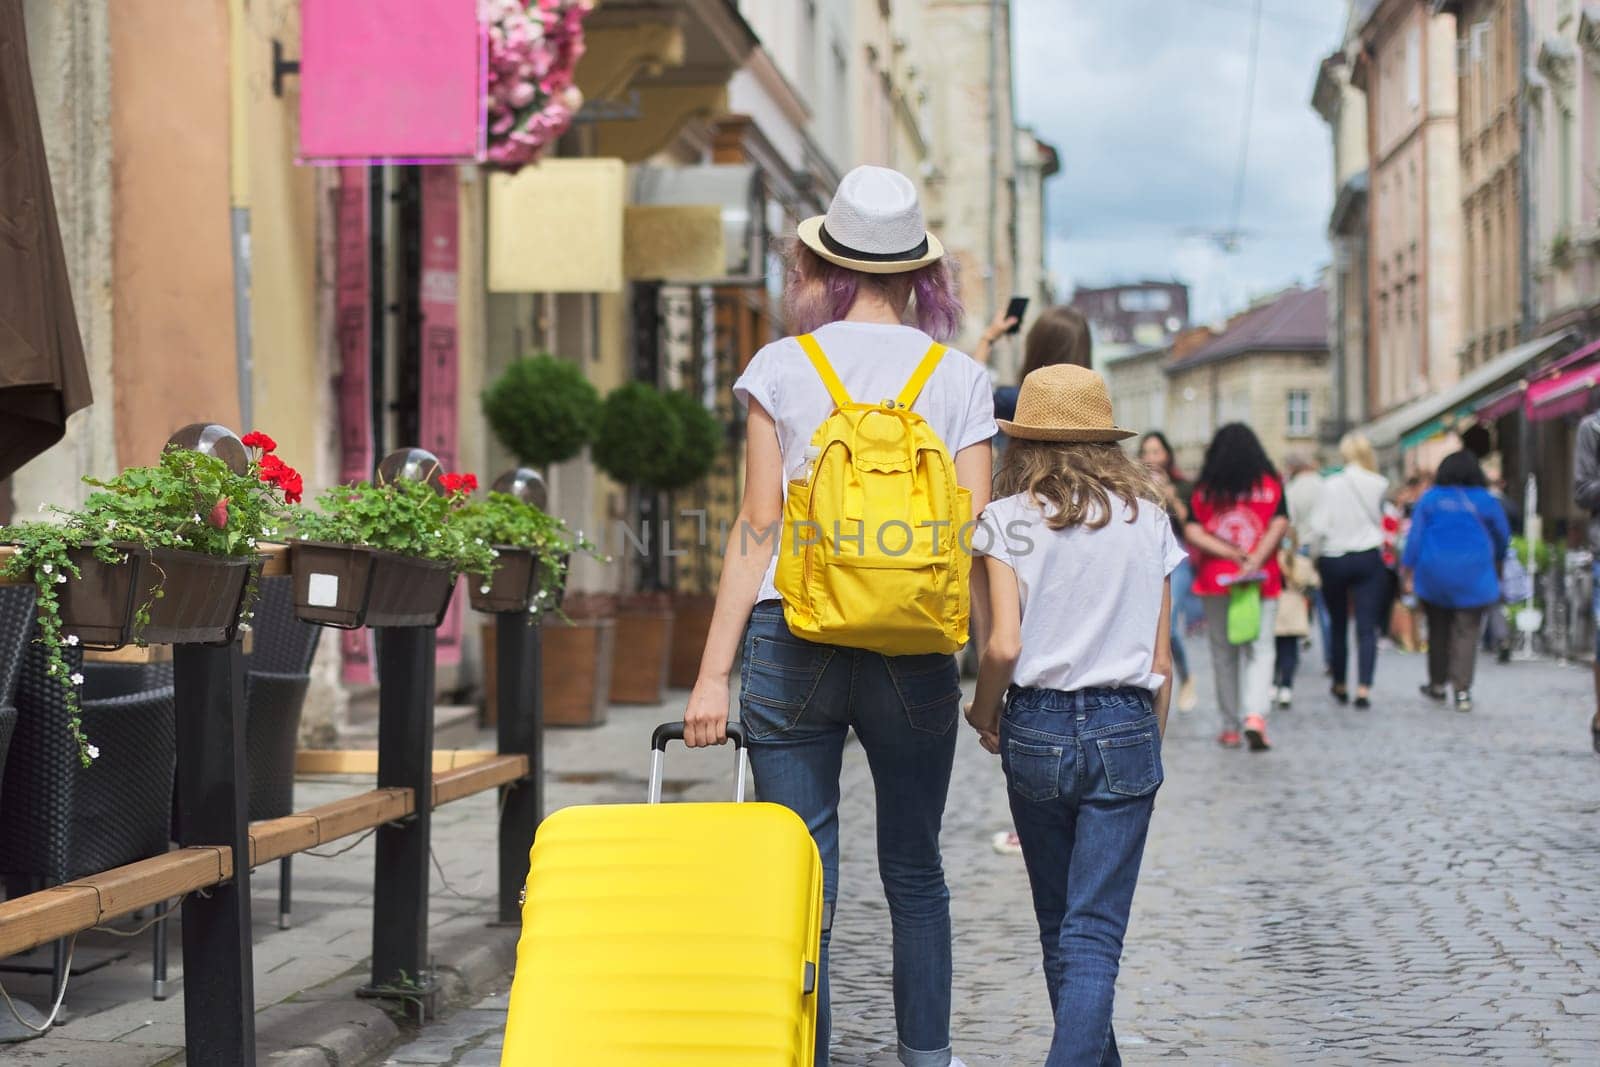 Two girls walking in tourist city holding hands with yellow suitcase, back view